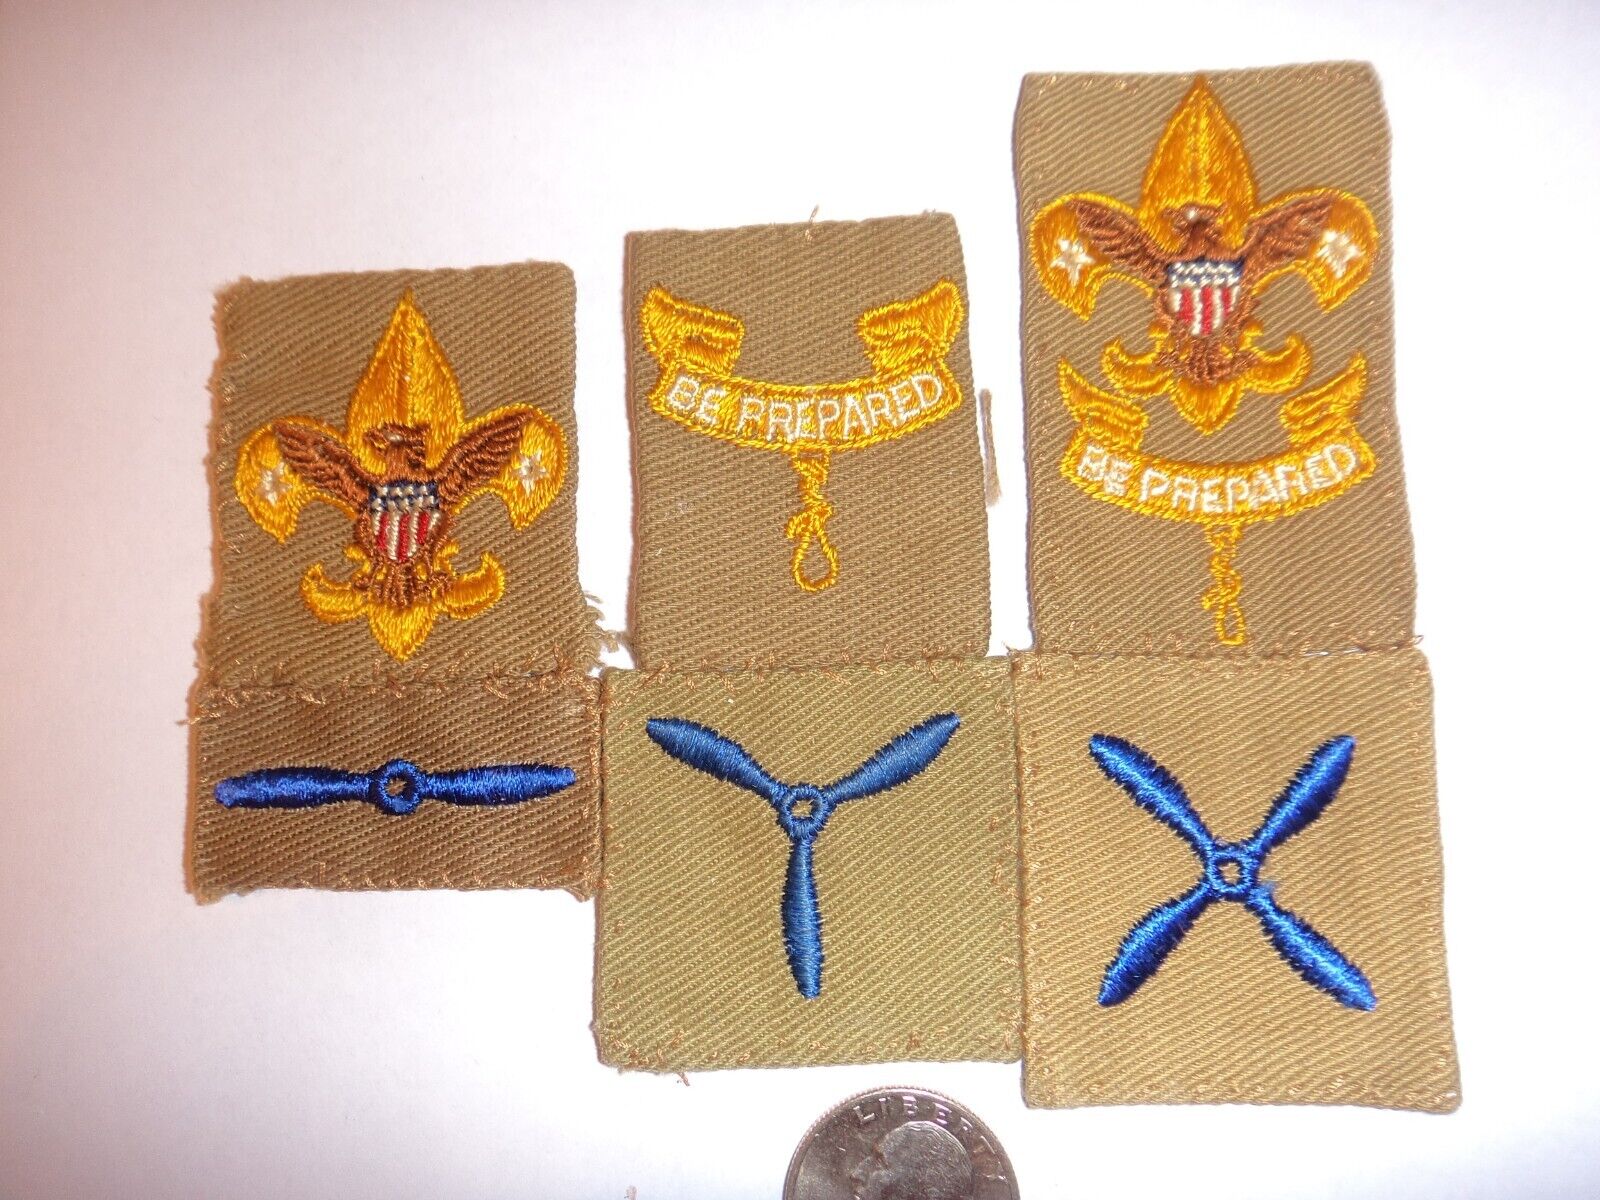 *****SUPER RARE  (3) 1942 AIR SCOUT CANDIDATE RANK BADGES TOGETHER